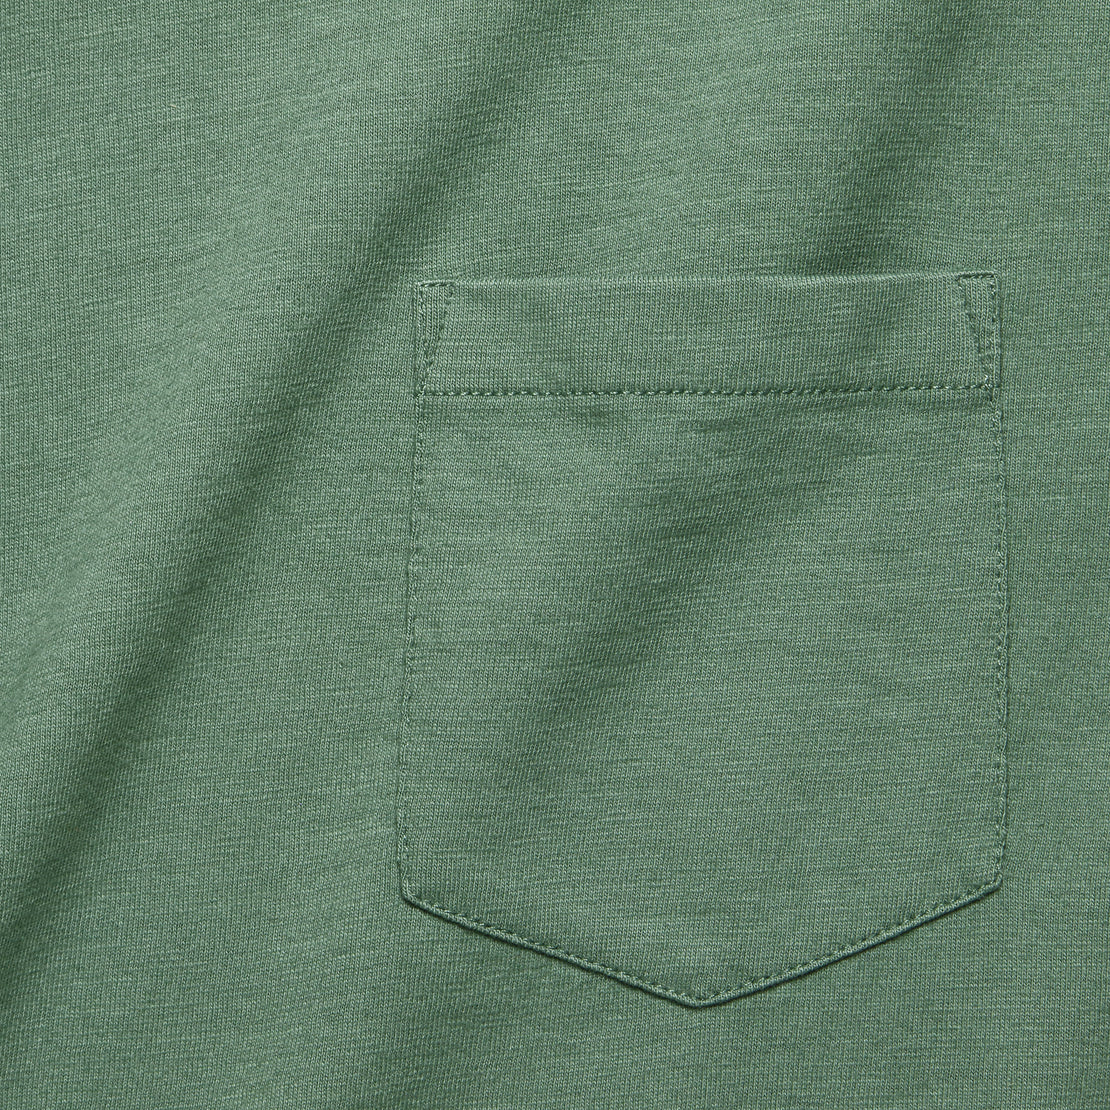 Garment Dyed Pocket Tee - Vail Green - Faherty - STAG Provisions - Tops - S/S Tee